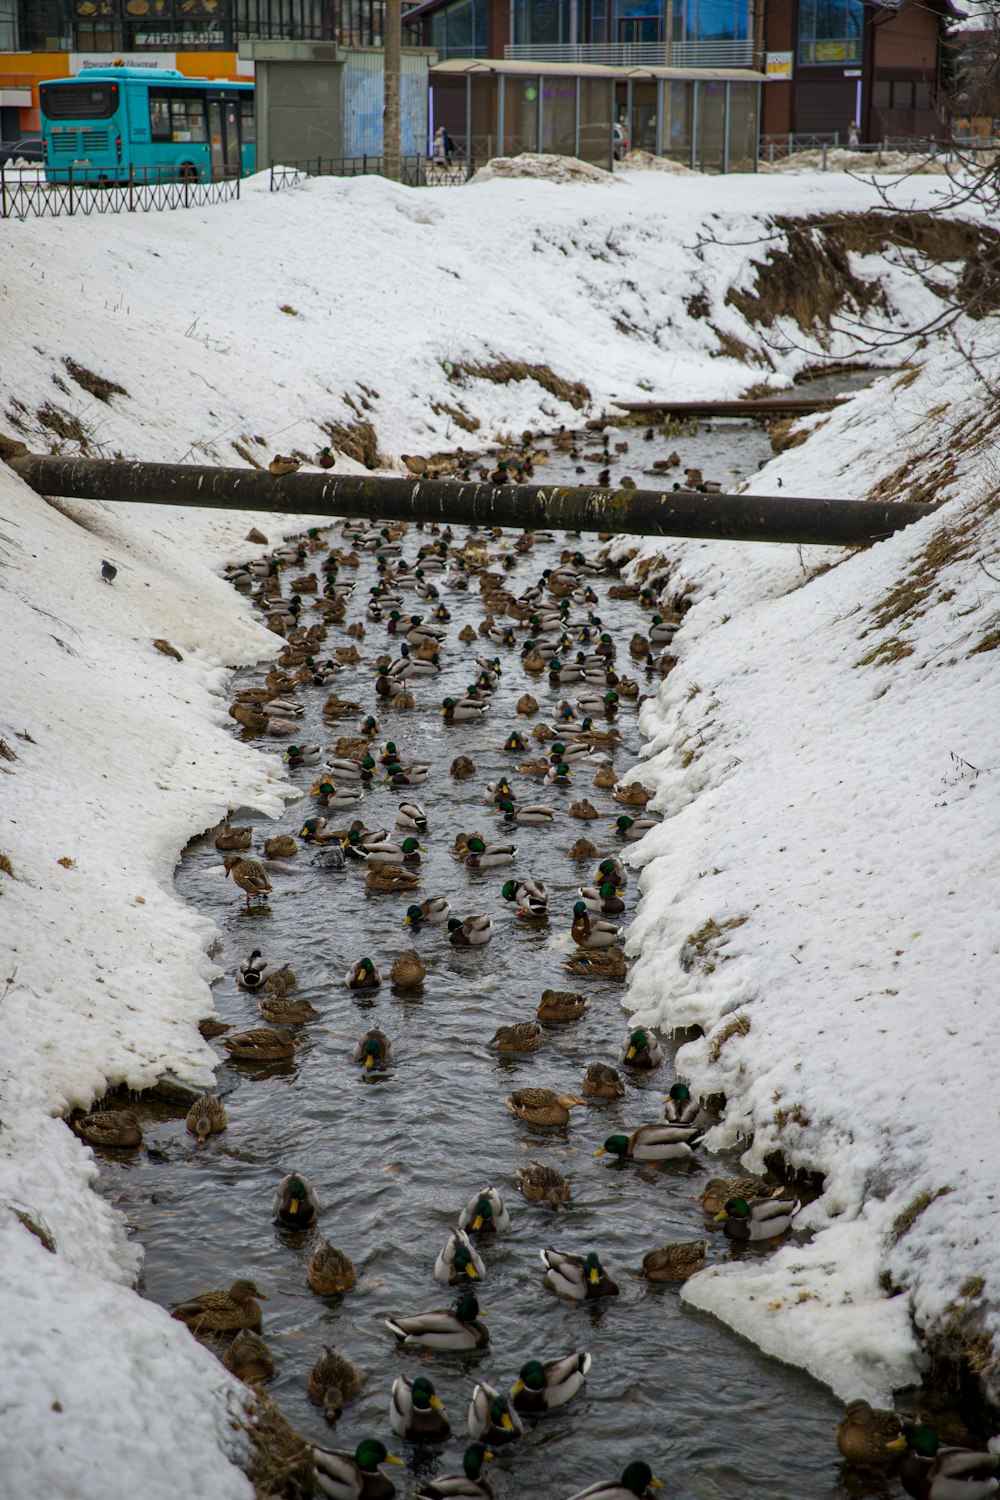 a bunch of ducks that are in the water